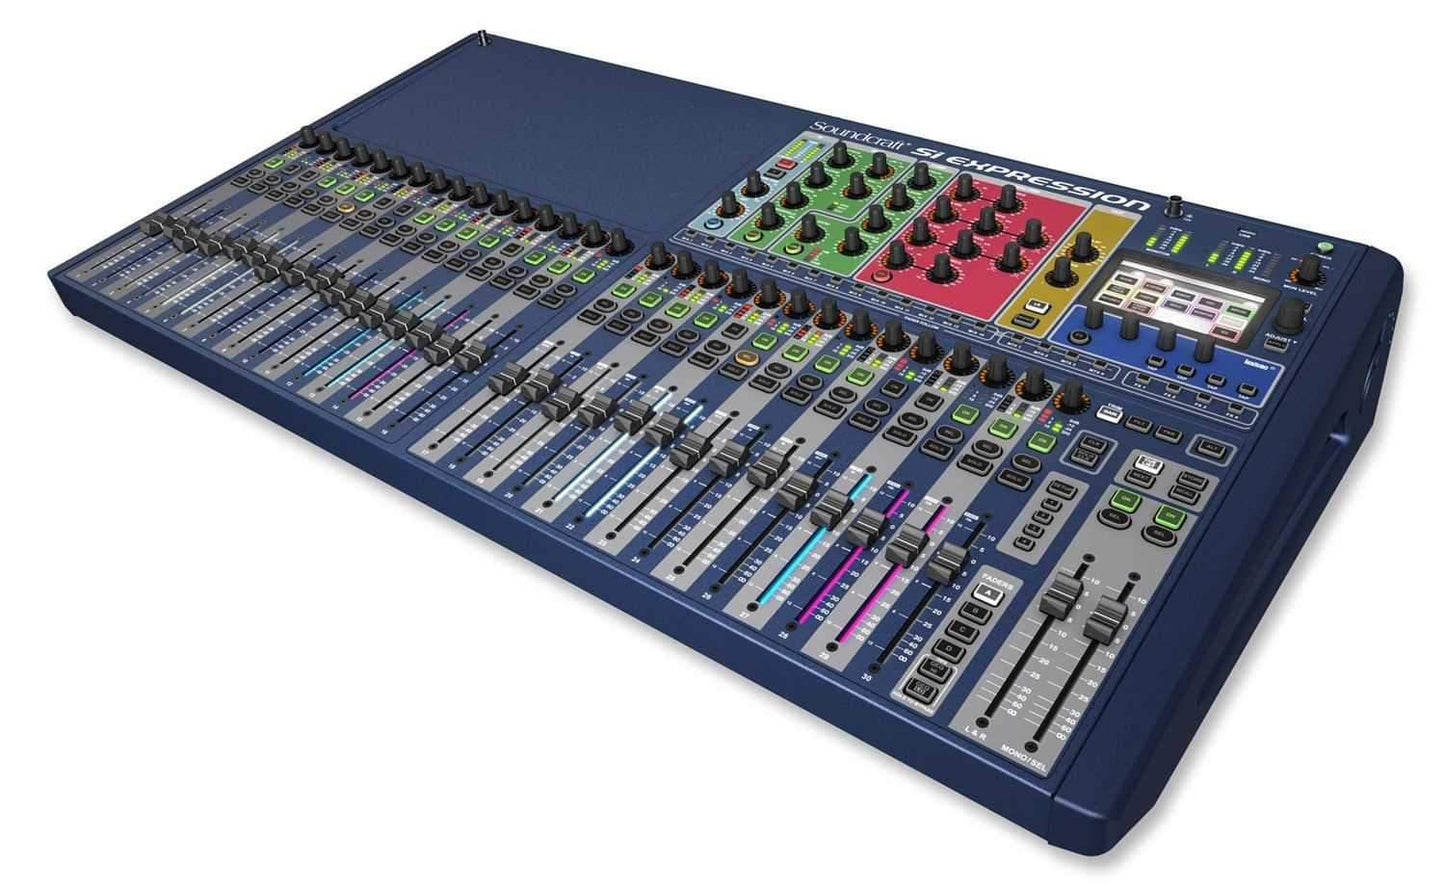 Soundcraft SI Expression 3 32Ch Digital Mixer - ProSound and Stage Lighting